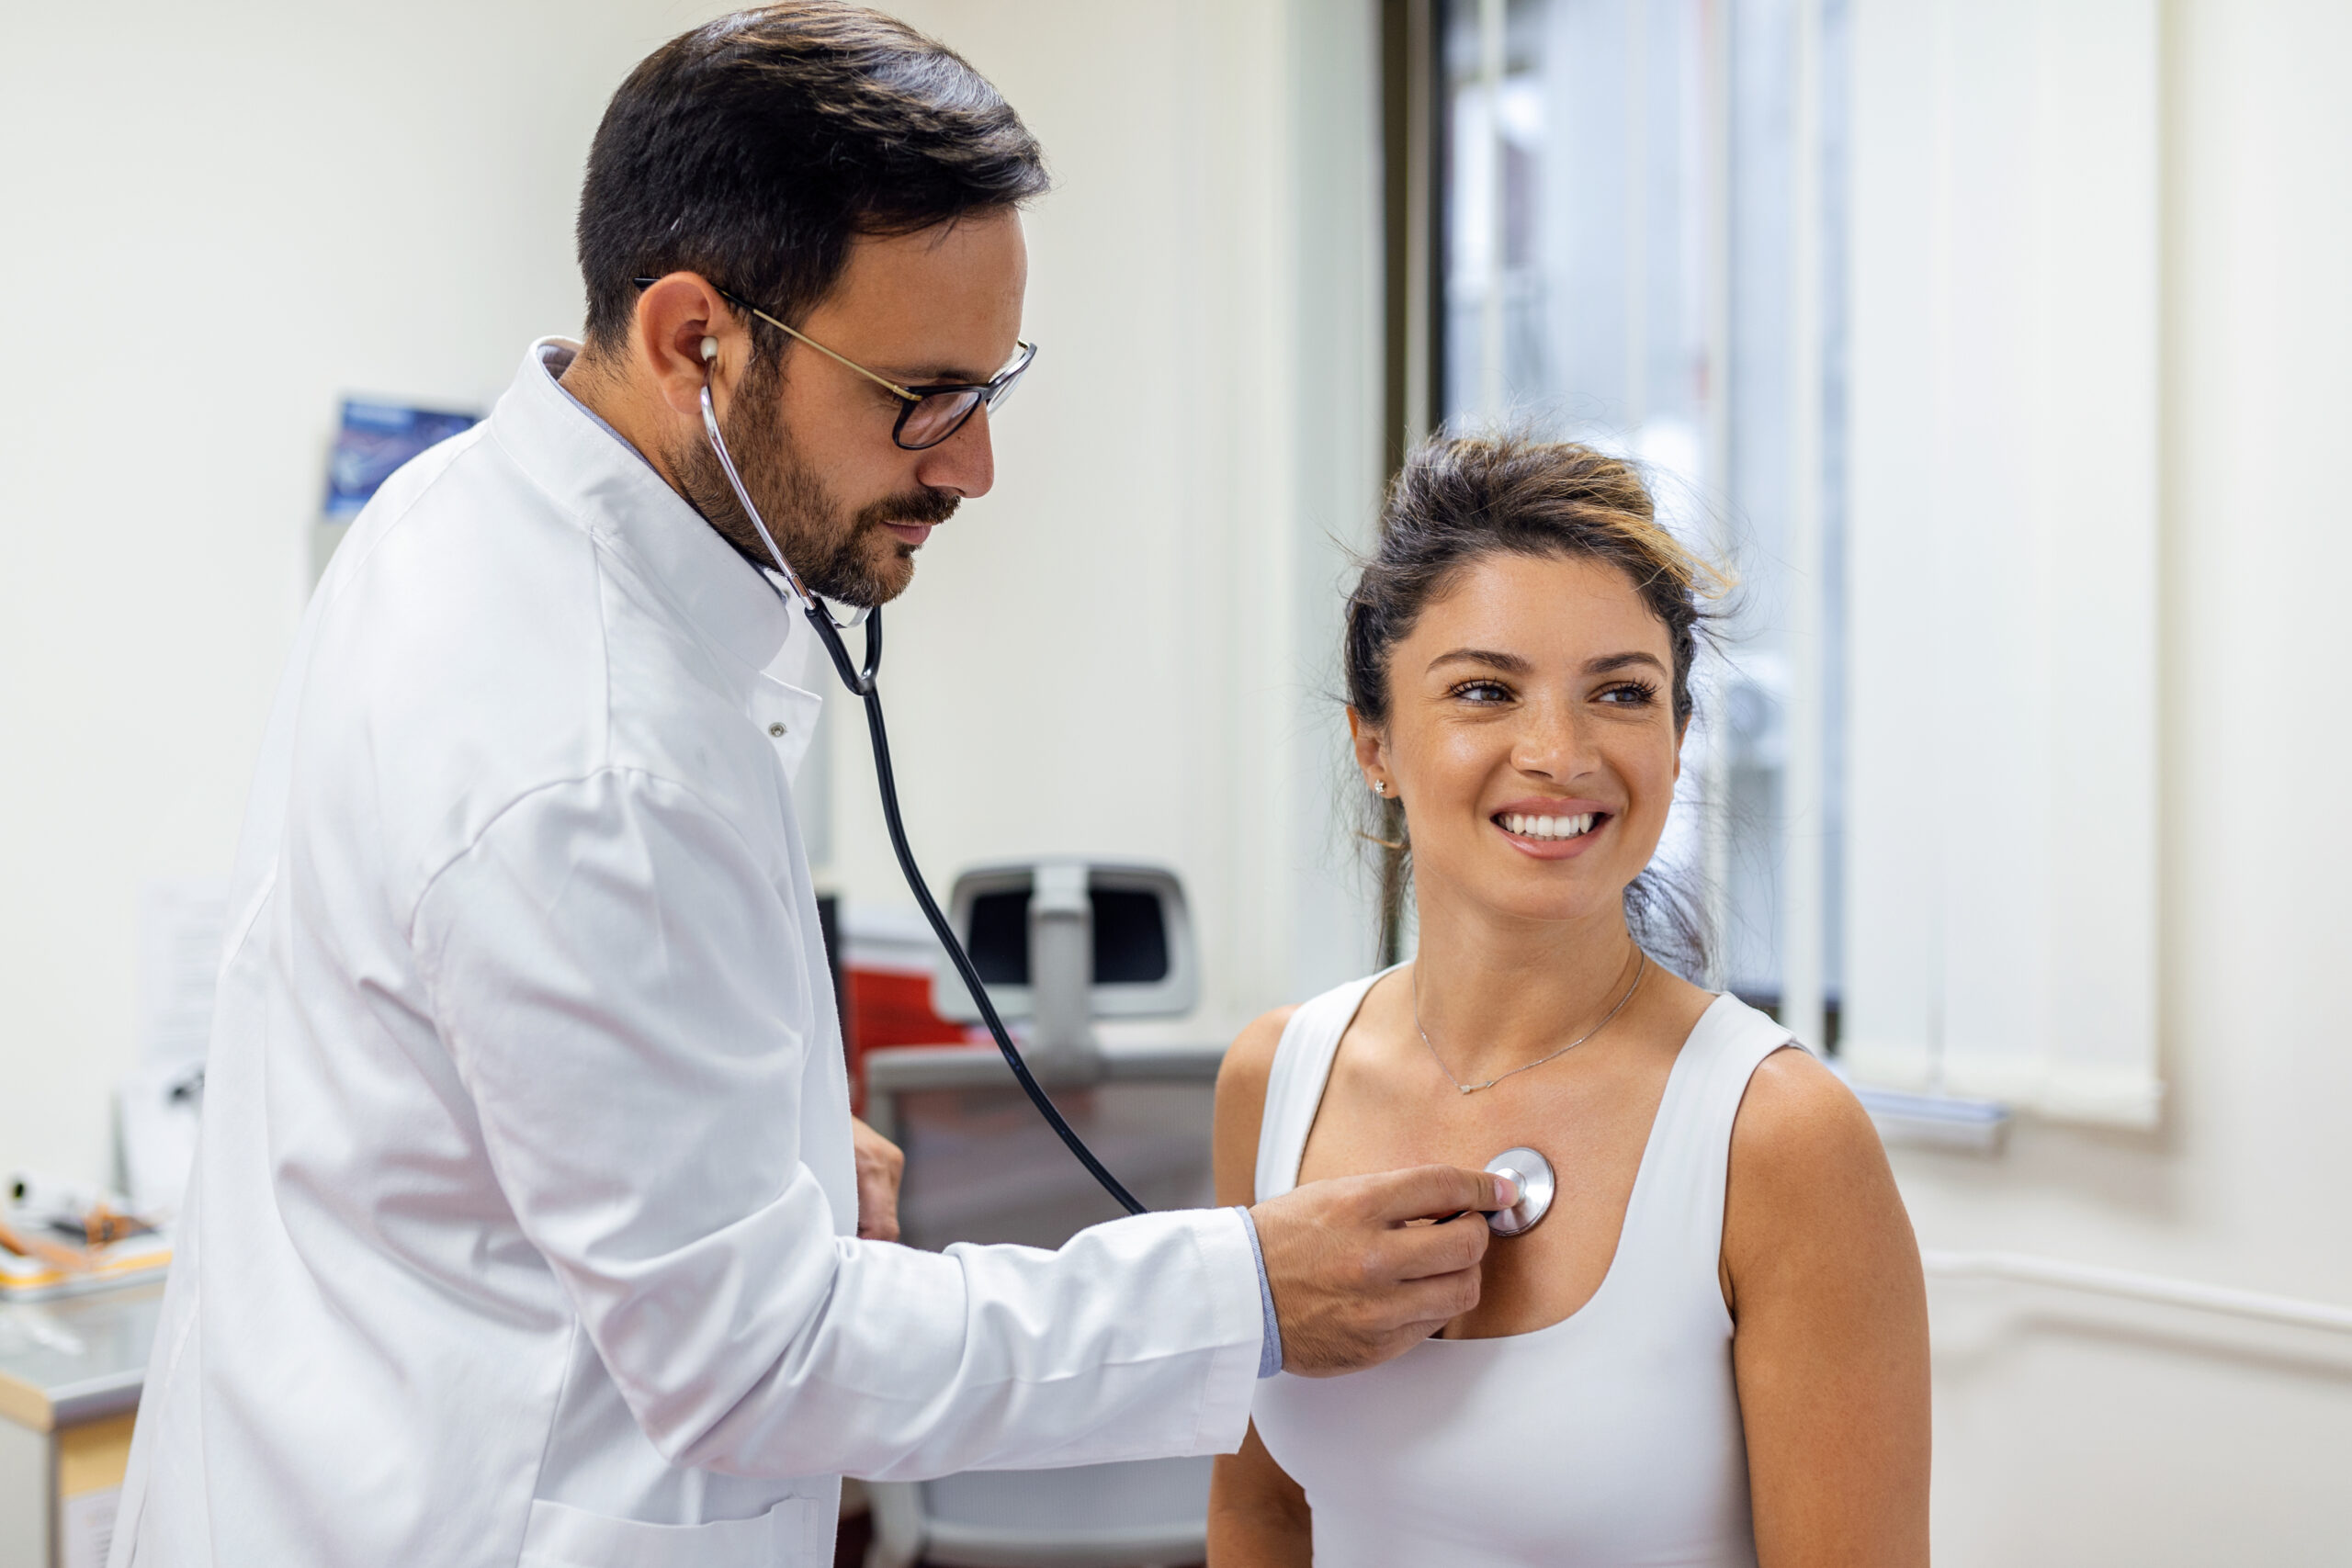 When to see a doctor for heart palpitations